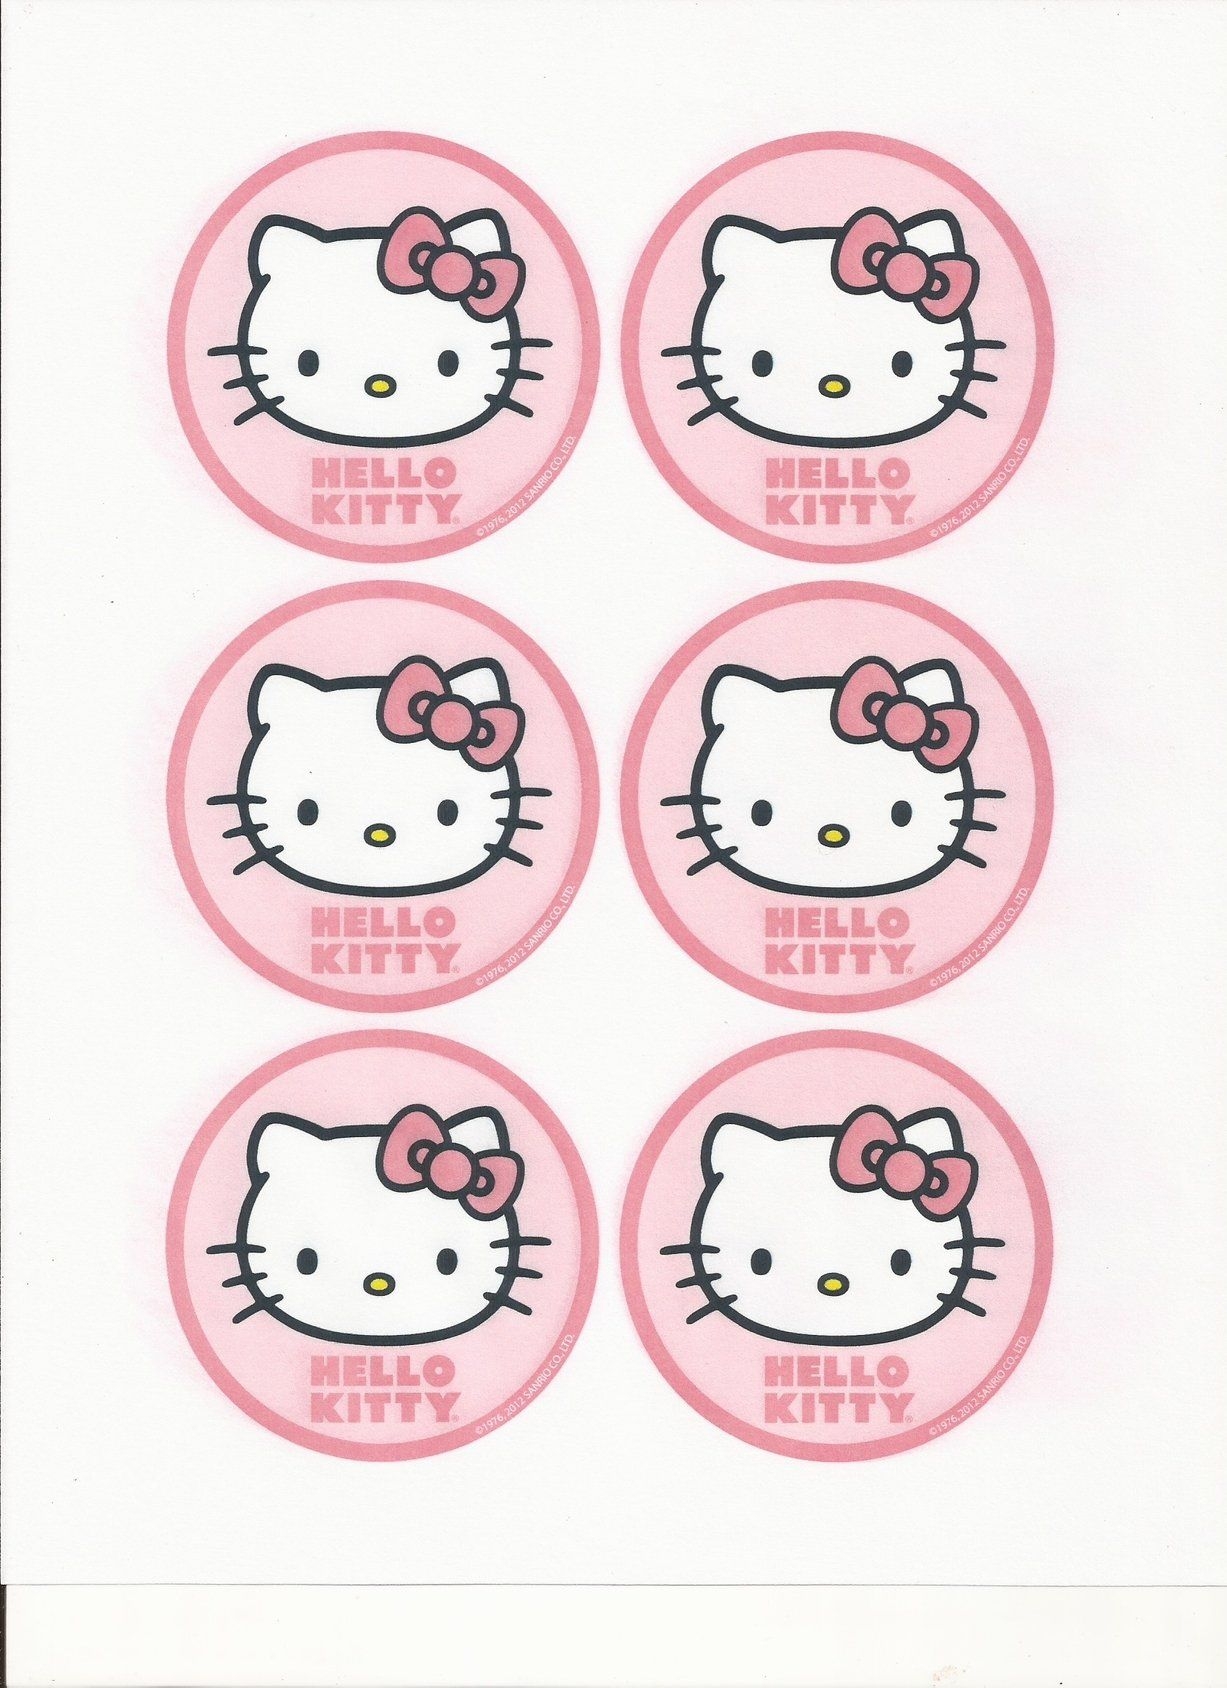 Hello Kitty With A Pink Bow On A Pink Background Edible Cupcake Topper Images ABPID04164 Hello Kitty Printables Hello Kitty Birthday Hello Kitty Themes